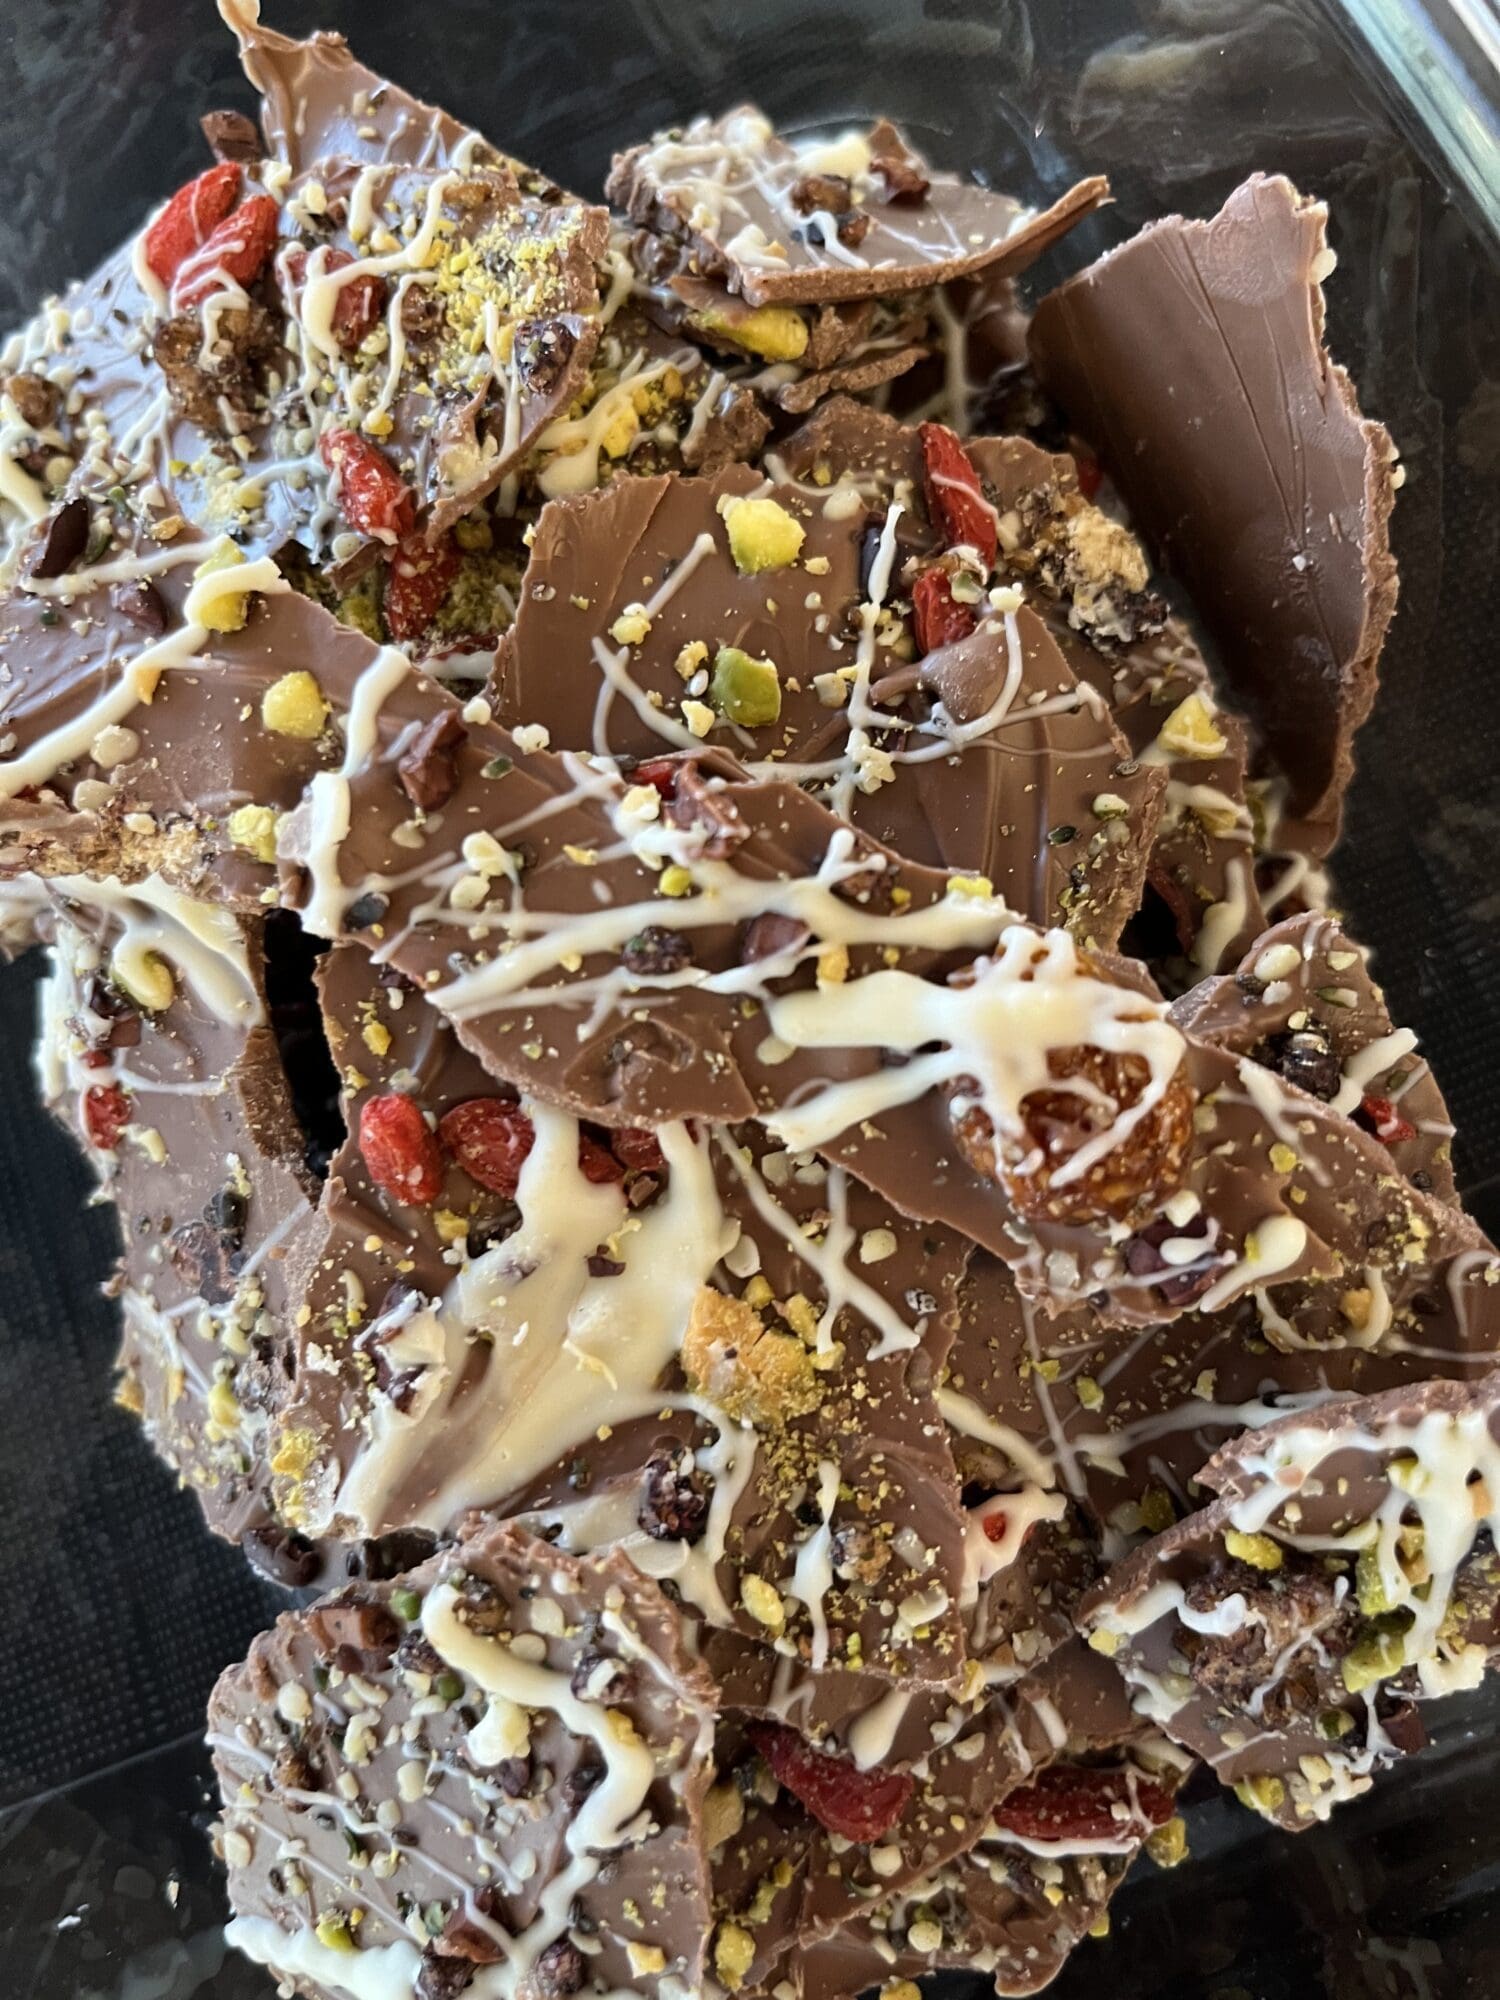 Revisit: Kate’s Leftover Easter Chocolate Smash!